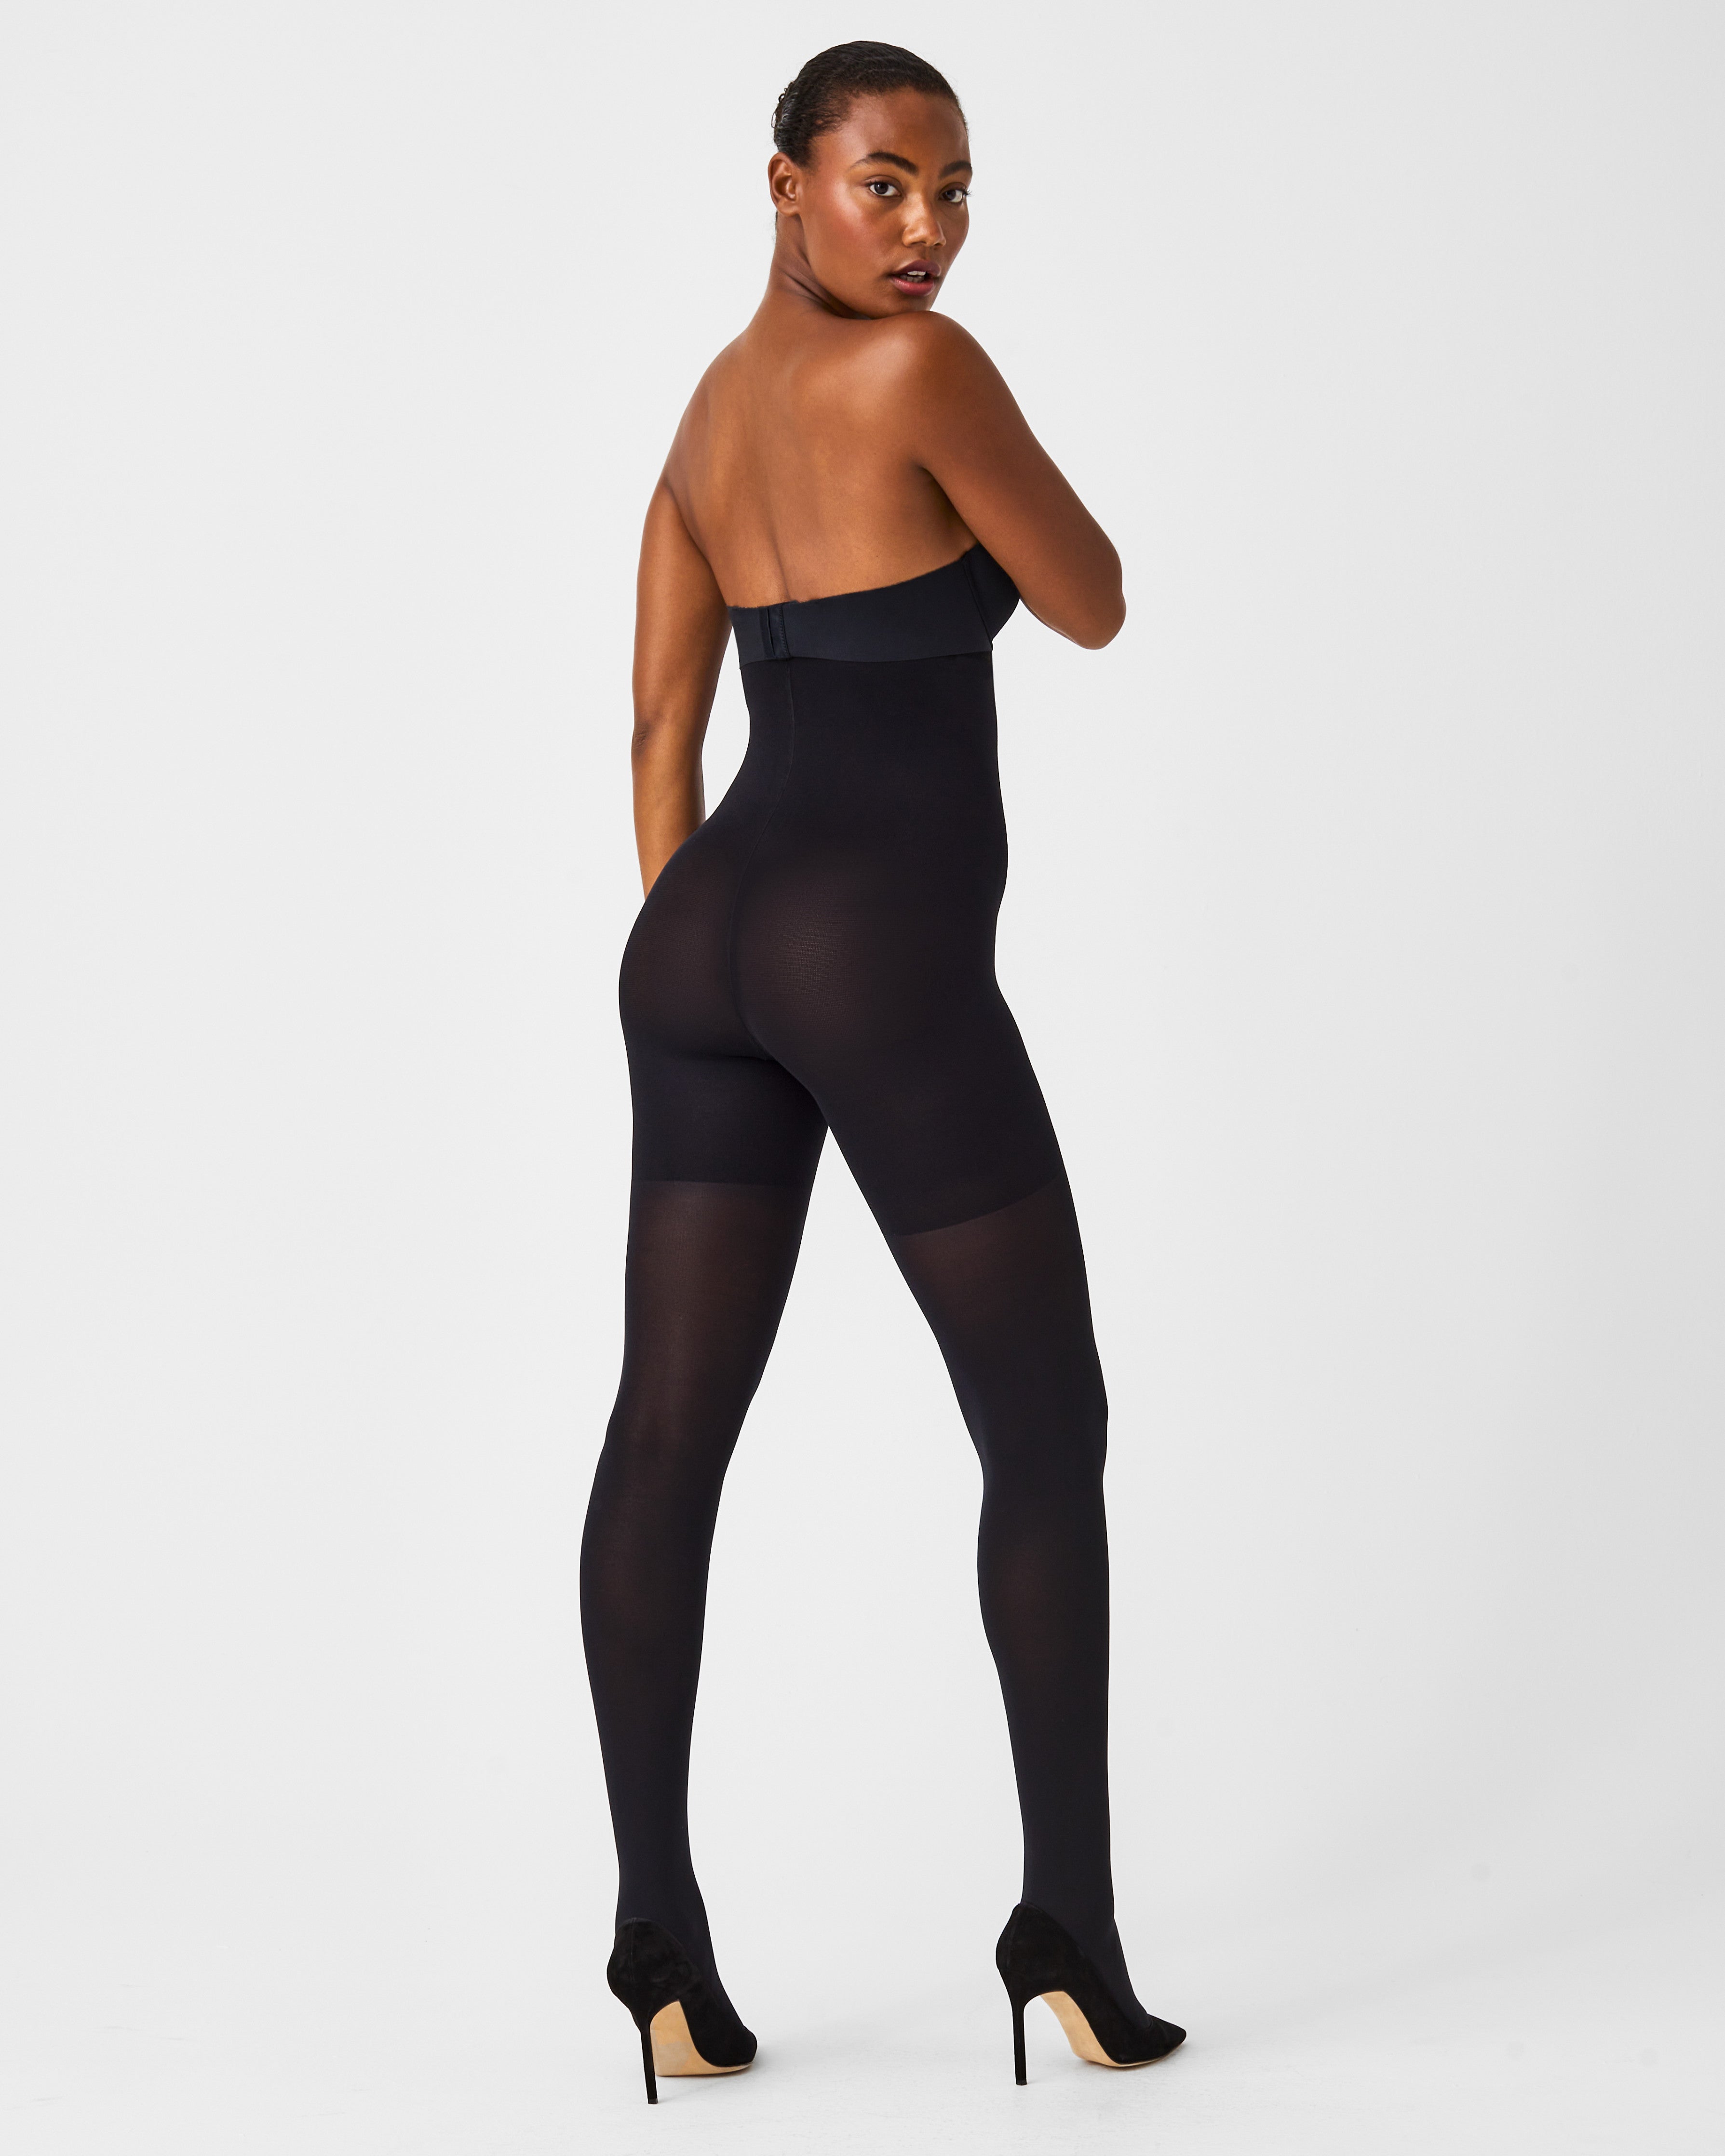 Spanx Women's End Tights Original 128, Bittersweet, A